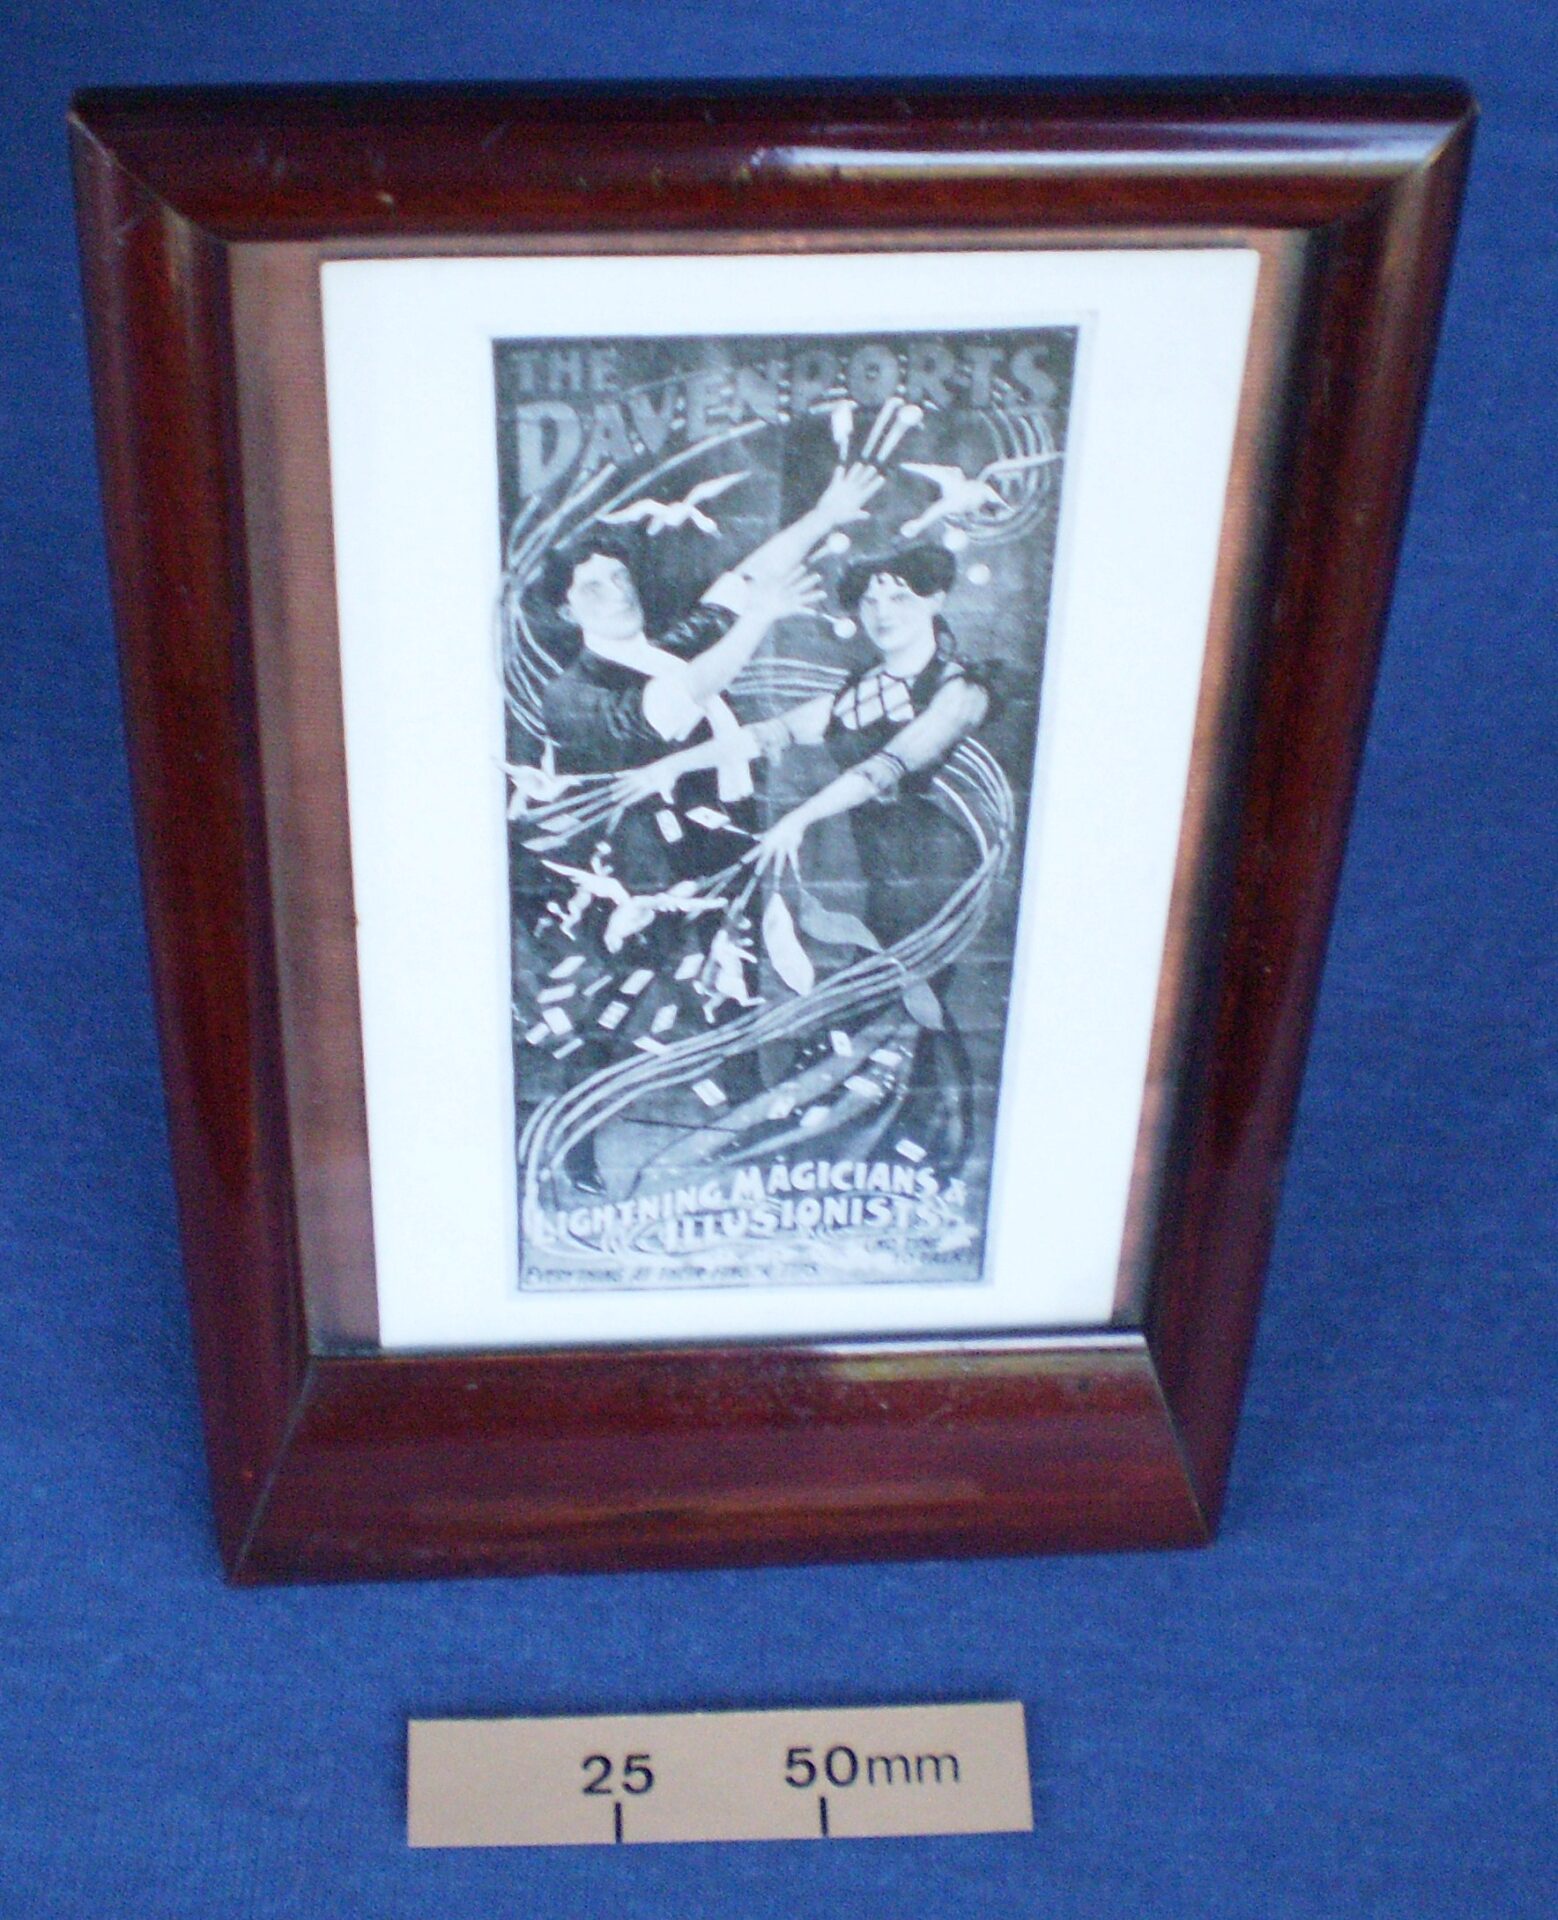 Framed postcard of The Davenports, Lightning Magicians & Illusionists, ‘No Time to Talk’